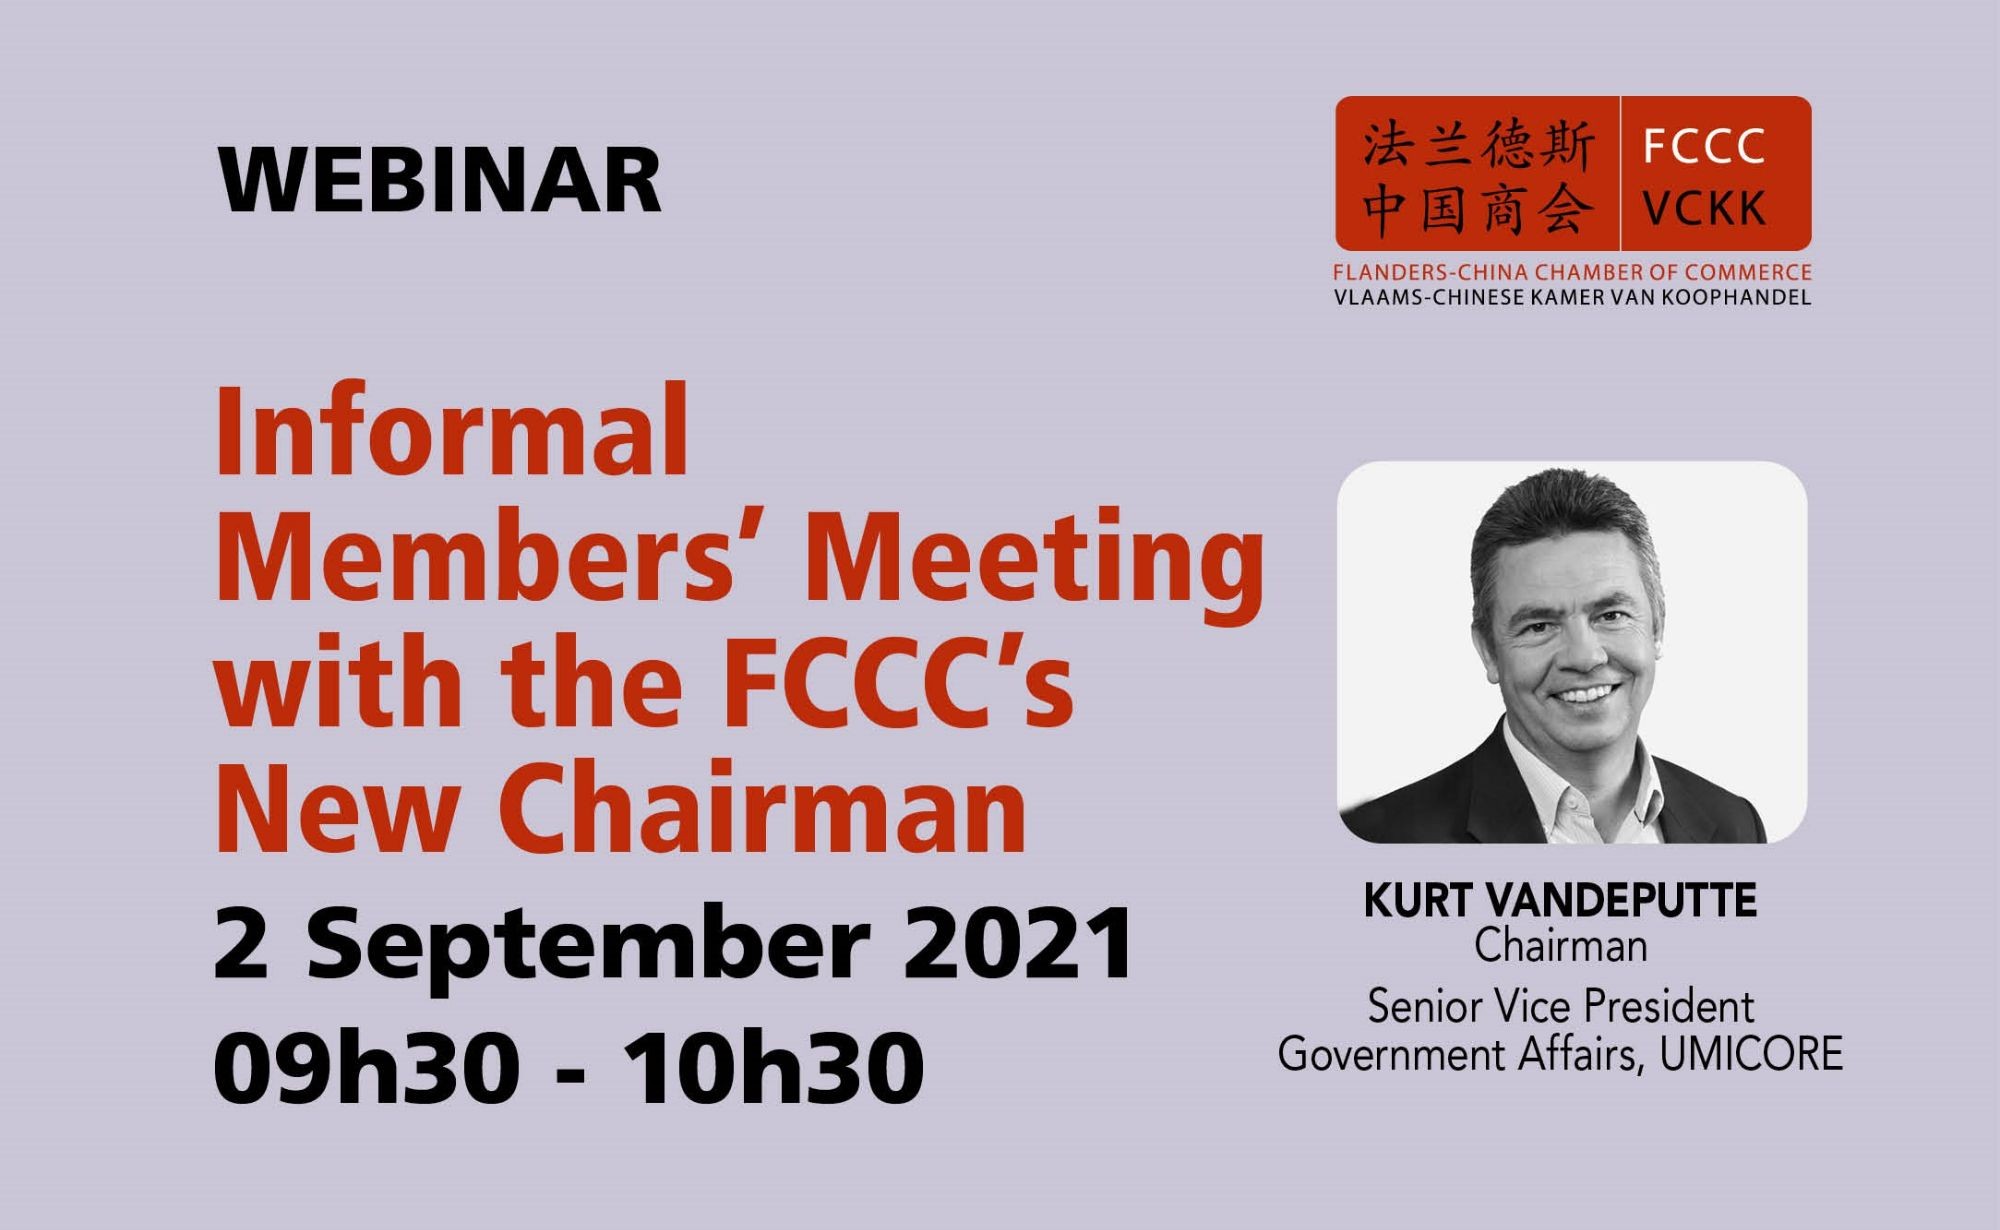 Webinar: Informal Members' Meeting with the FCCC's New Chairman